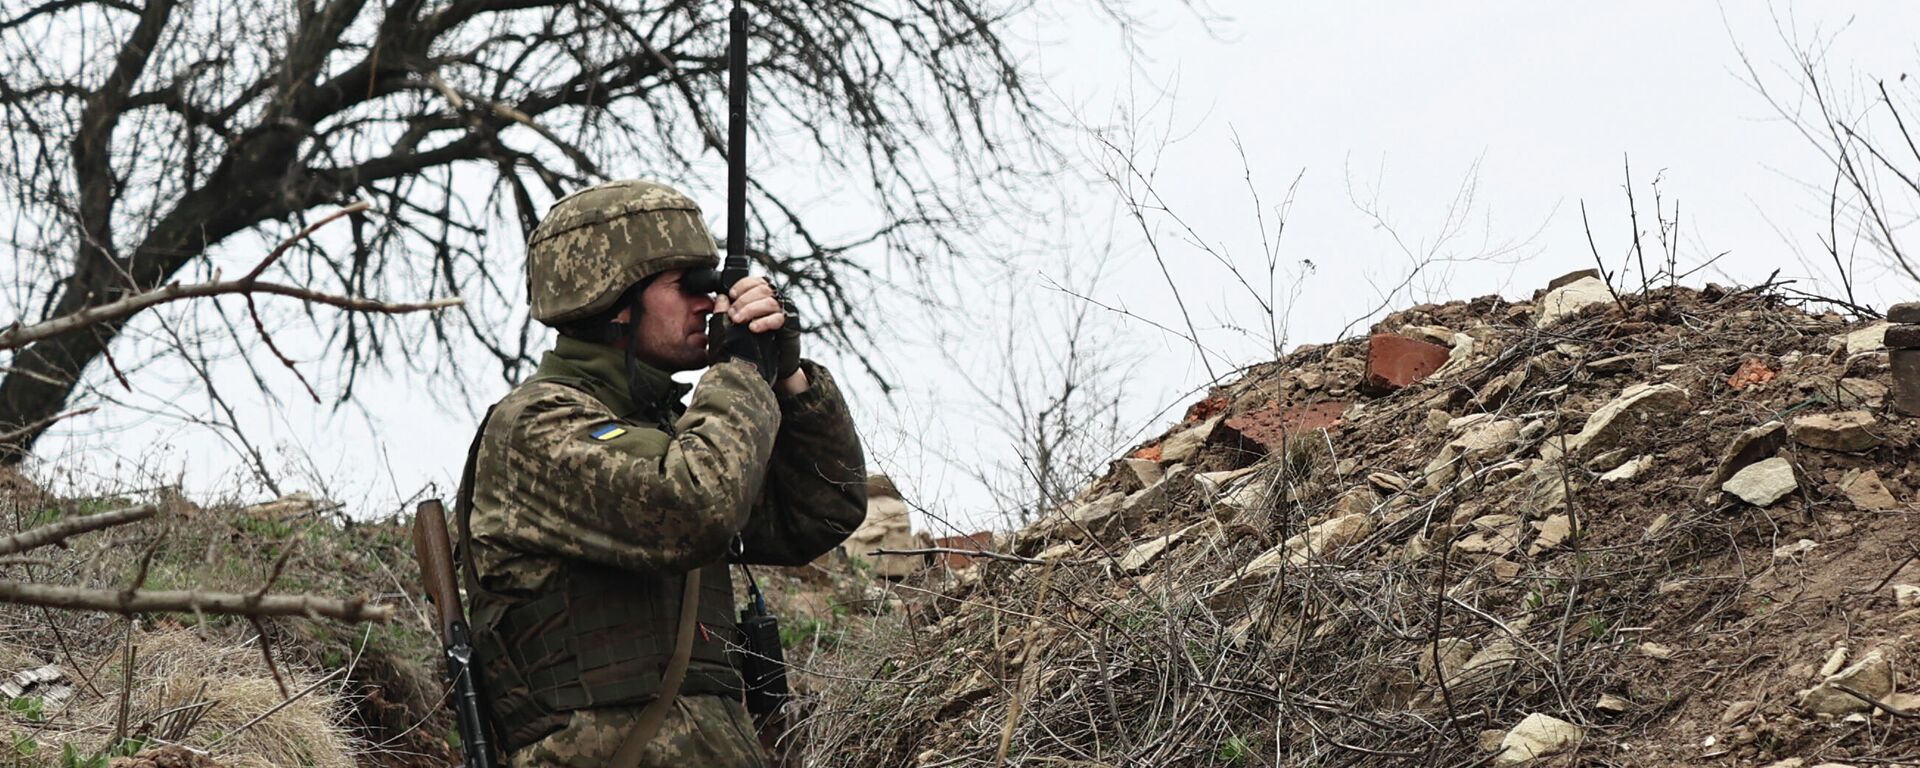 FILE - In this April 12, 2021, file photo, Ukrainian soldier watches through a periscope at fighting positions near Donetsk, Ukraine - Sputnik International, 1920, 24.02.2022